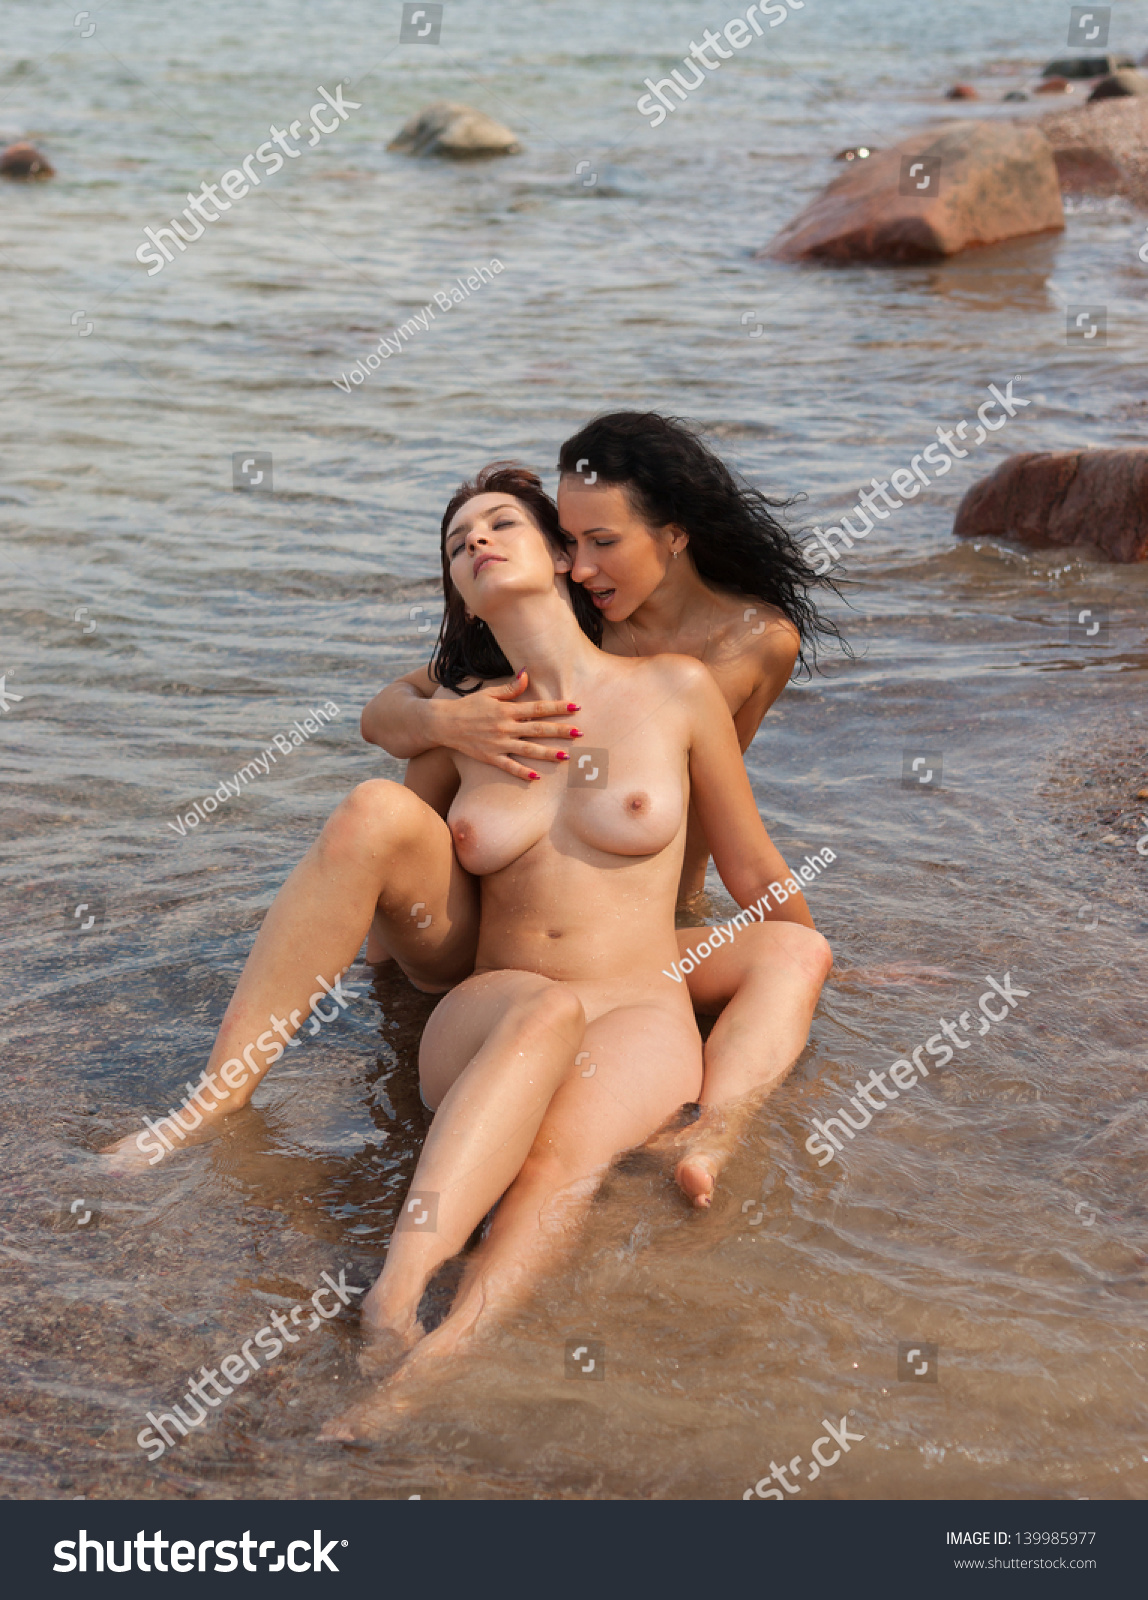 Naked women at the beach pics